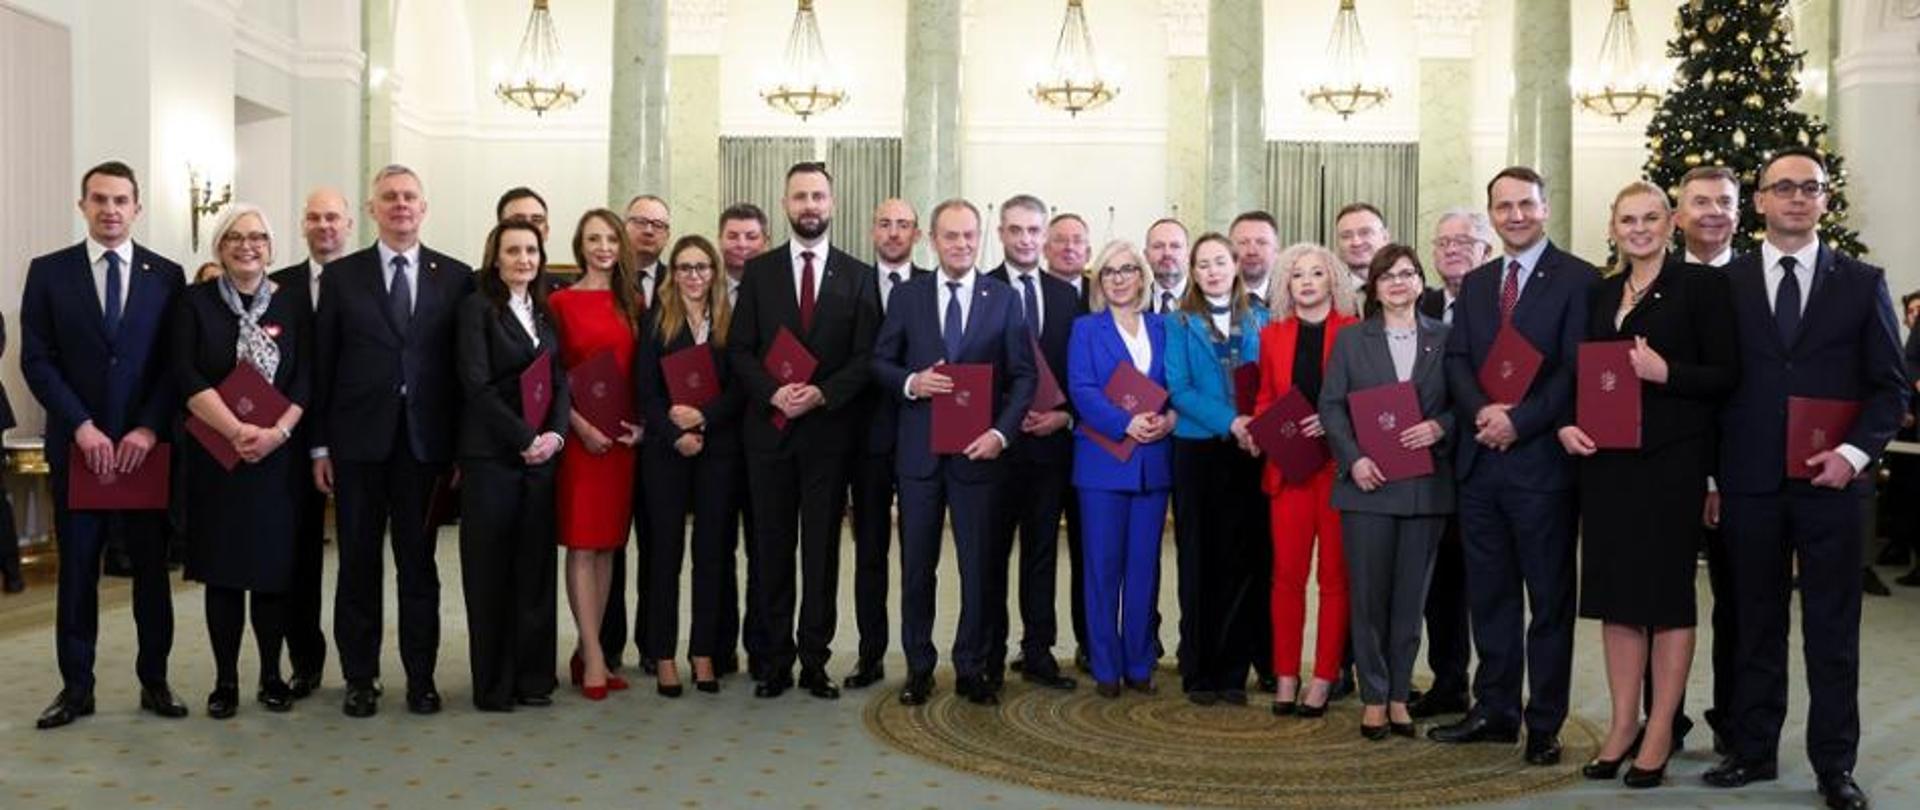 a group photo of men and women appointed as cabinet ministers standing with Prime Minister in the center. Minister of Sport and Tourism - Slawomir Nitras - is the seventh on the right